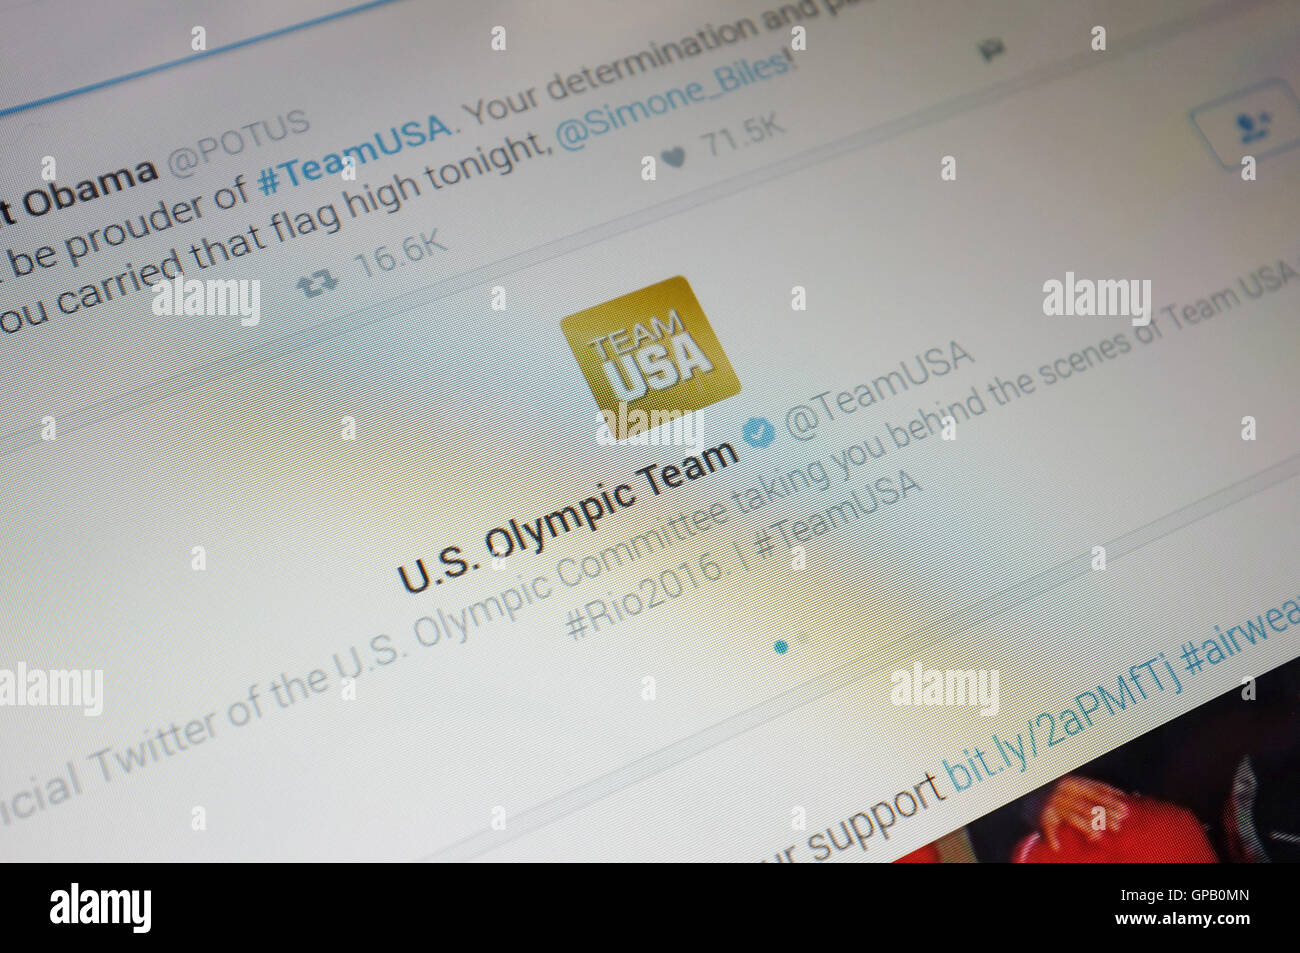 An image of the Twitter profile of the U.S. Olympic Team on Twitter. Stock Photo